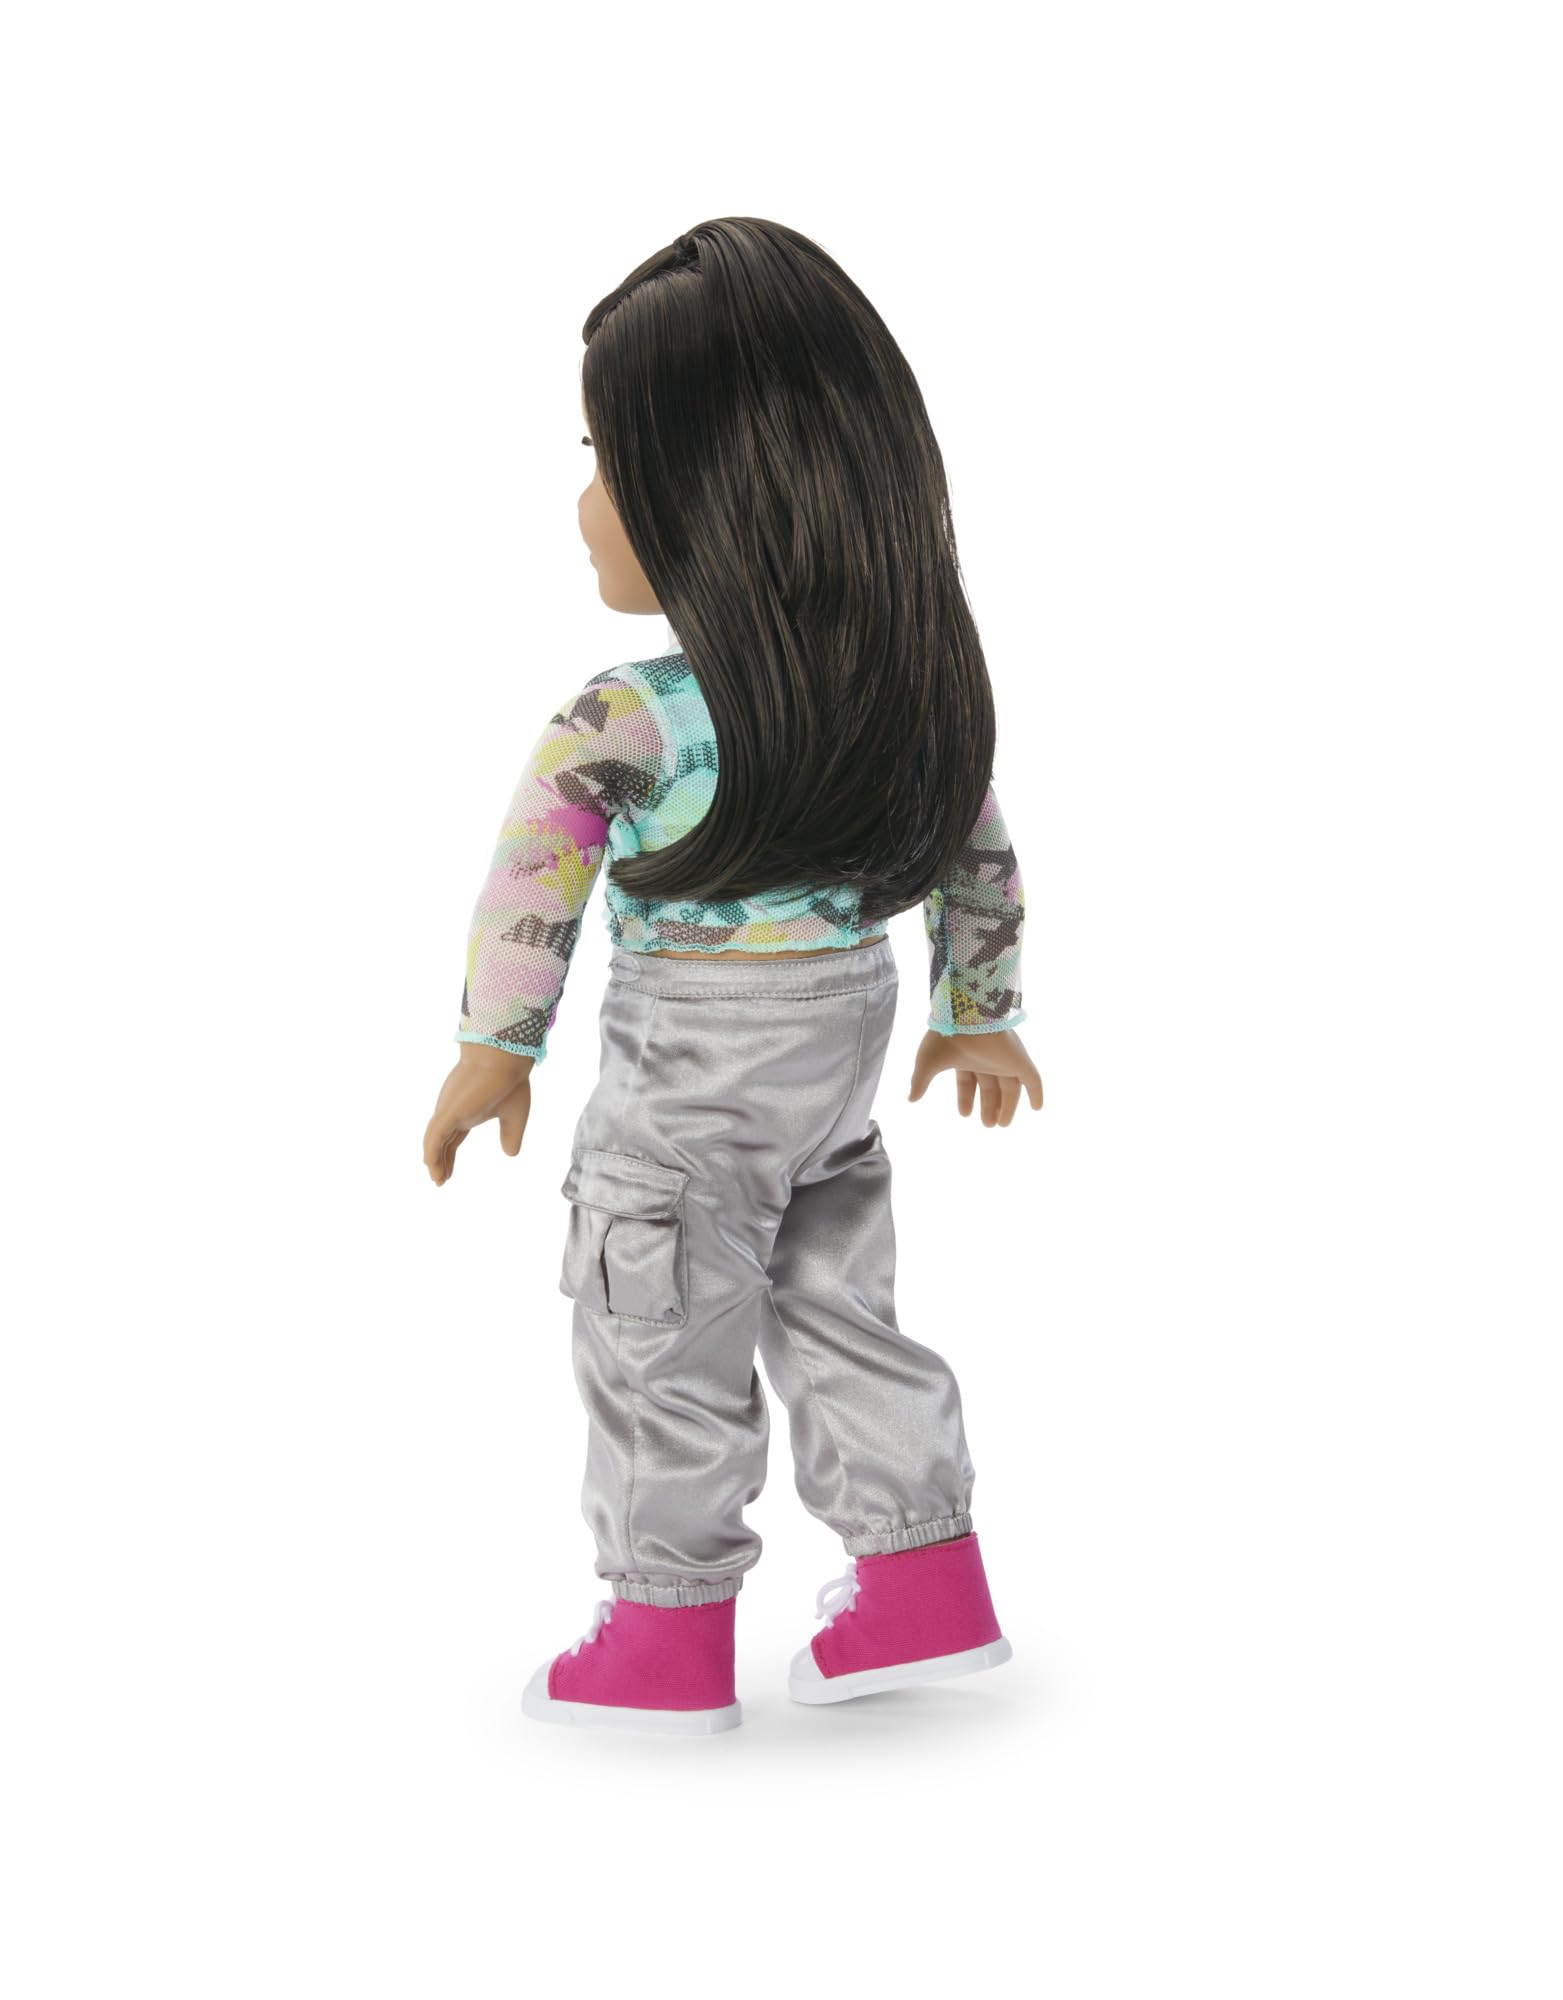 American Girl Girl of The Year Kavi Sharma 18-inch Doll and Book Featuring 7 Pieces for Ages 8+